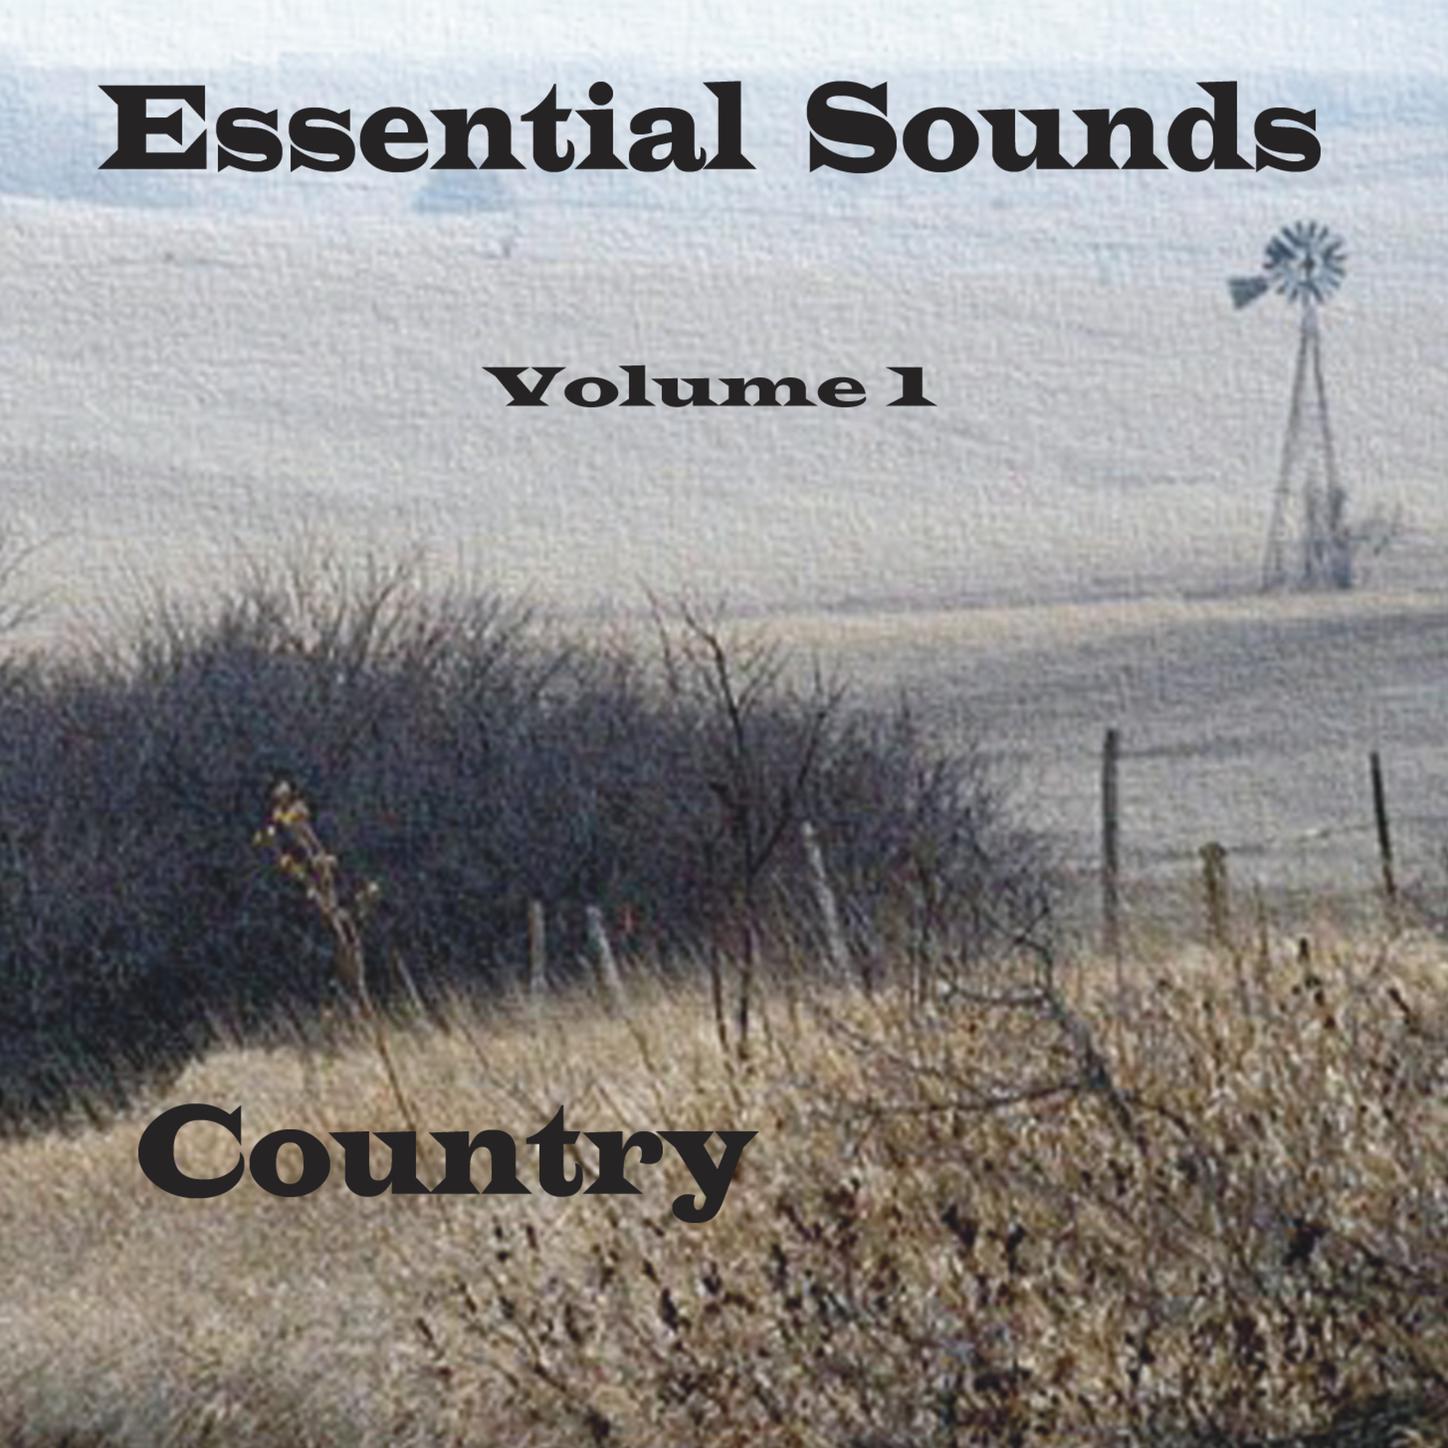 Essential Sounds, Vol 1.: Country